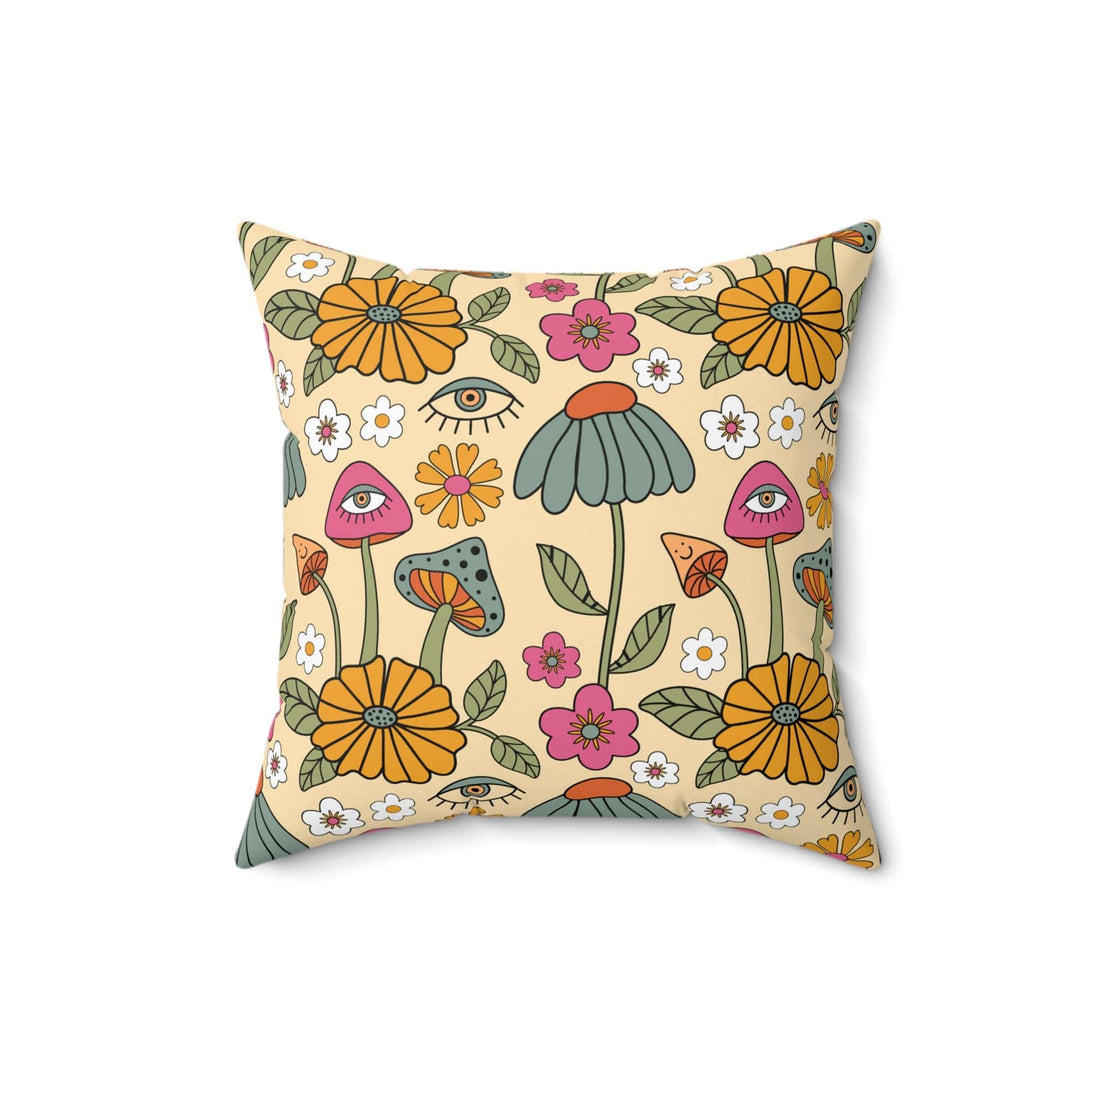 Kate McEnroe New York Hippie Mushroom Cottagecore Aesthetic Throw Pillow with Insert, Retro Floral 70s Psychedelic Accent Pillow Throw Pillows 16&quot; × 16&quot; 19932877051404818481